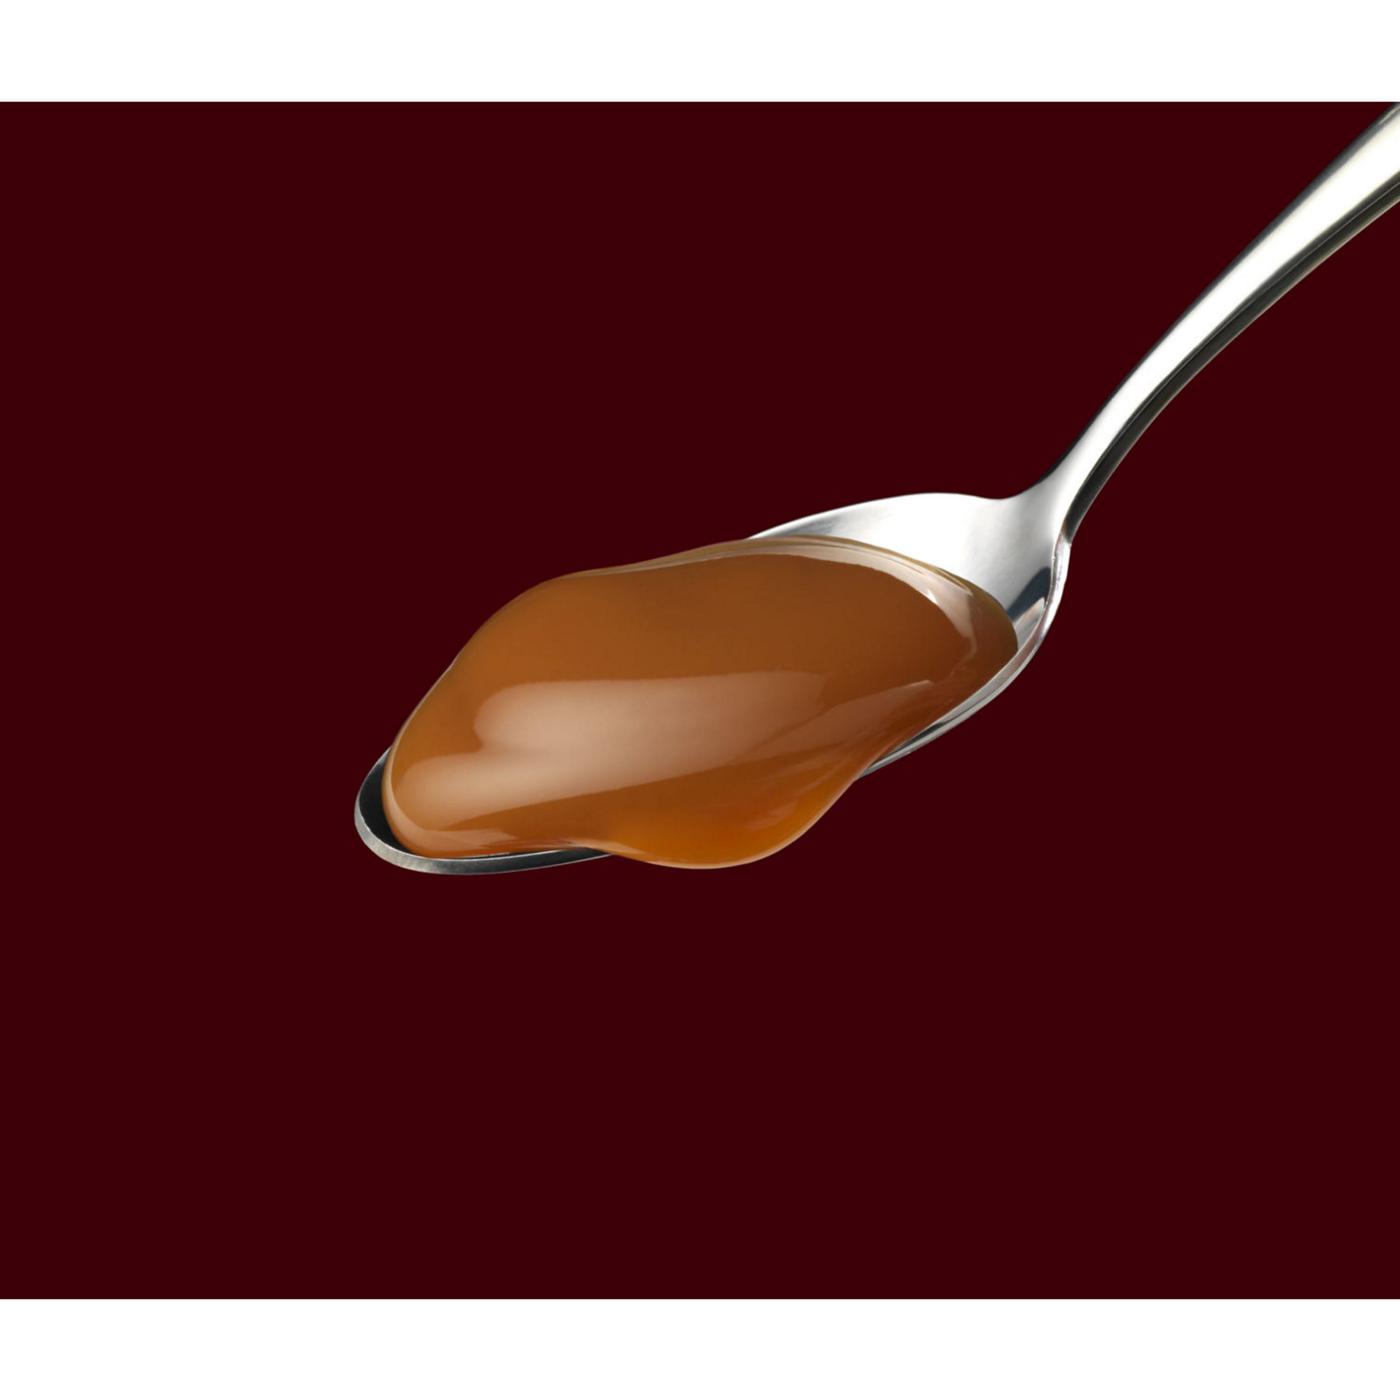 Hershey's Caramel Topping; image 5 of 8